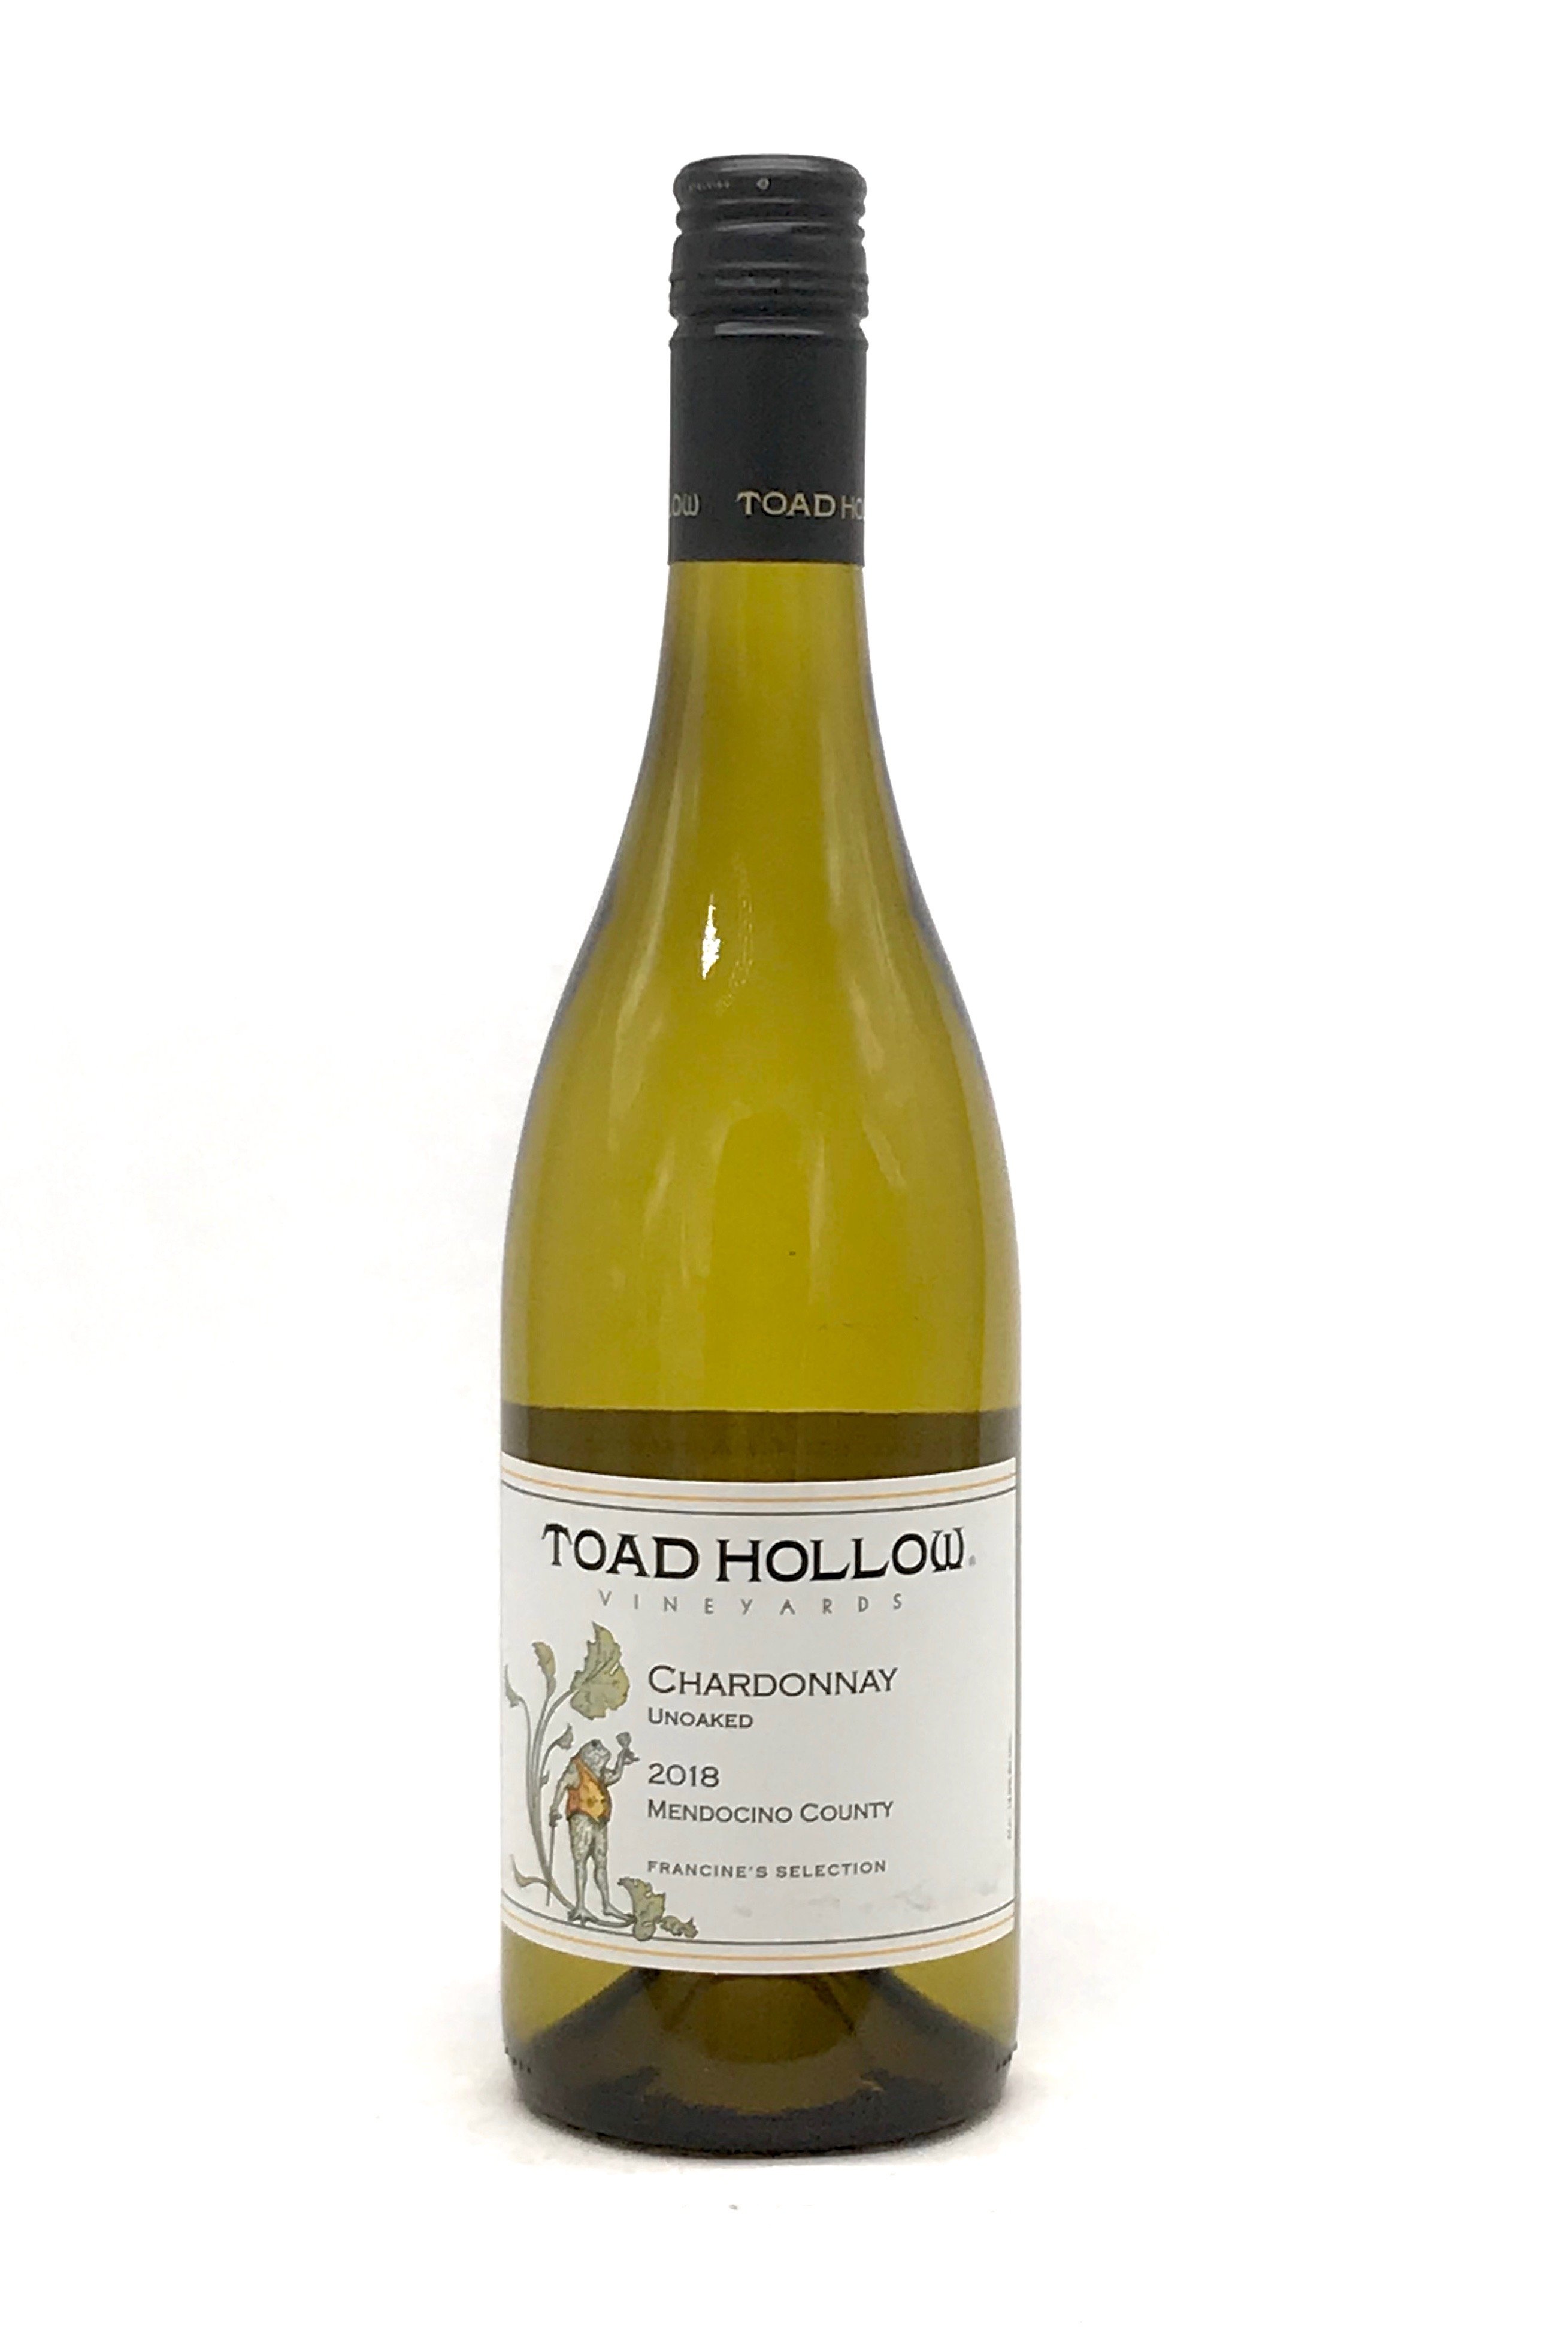 images/wine/WHITE WINE/Toad Hollow Chardonnay.jpg